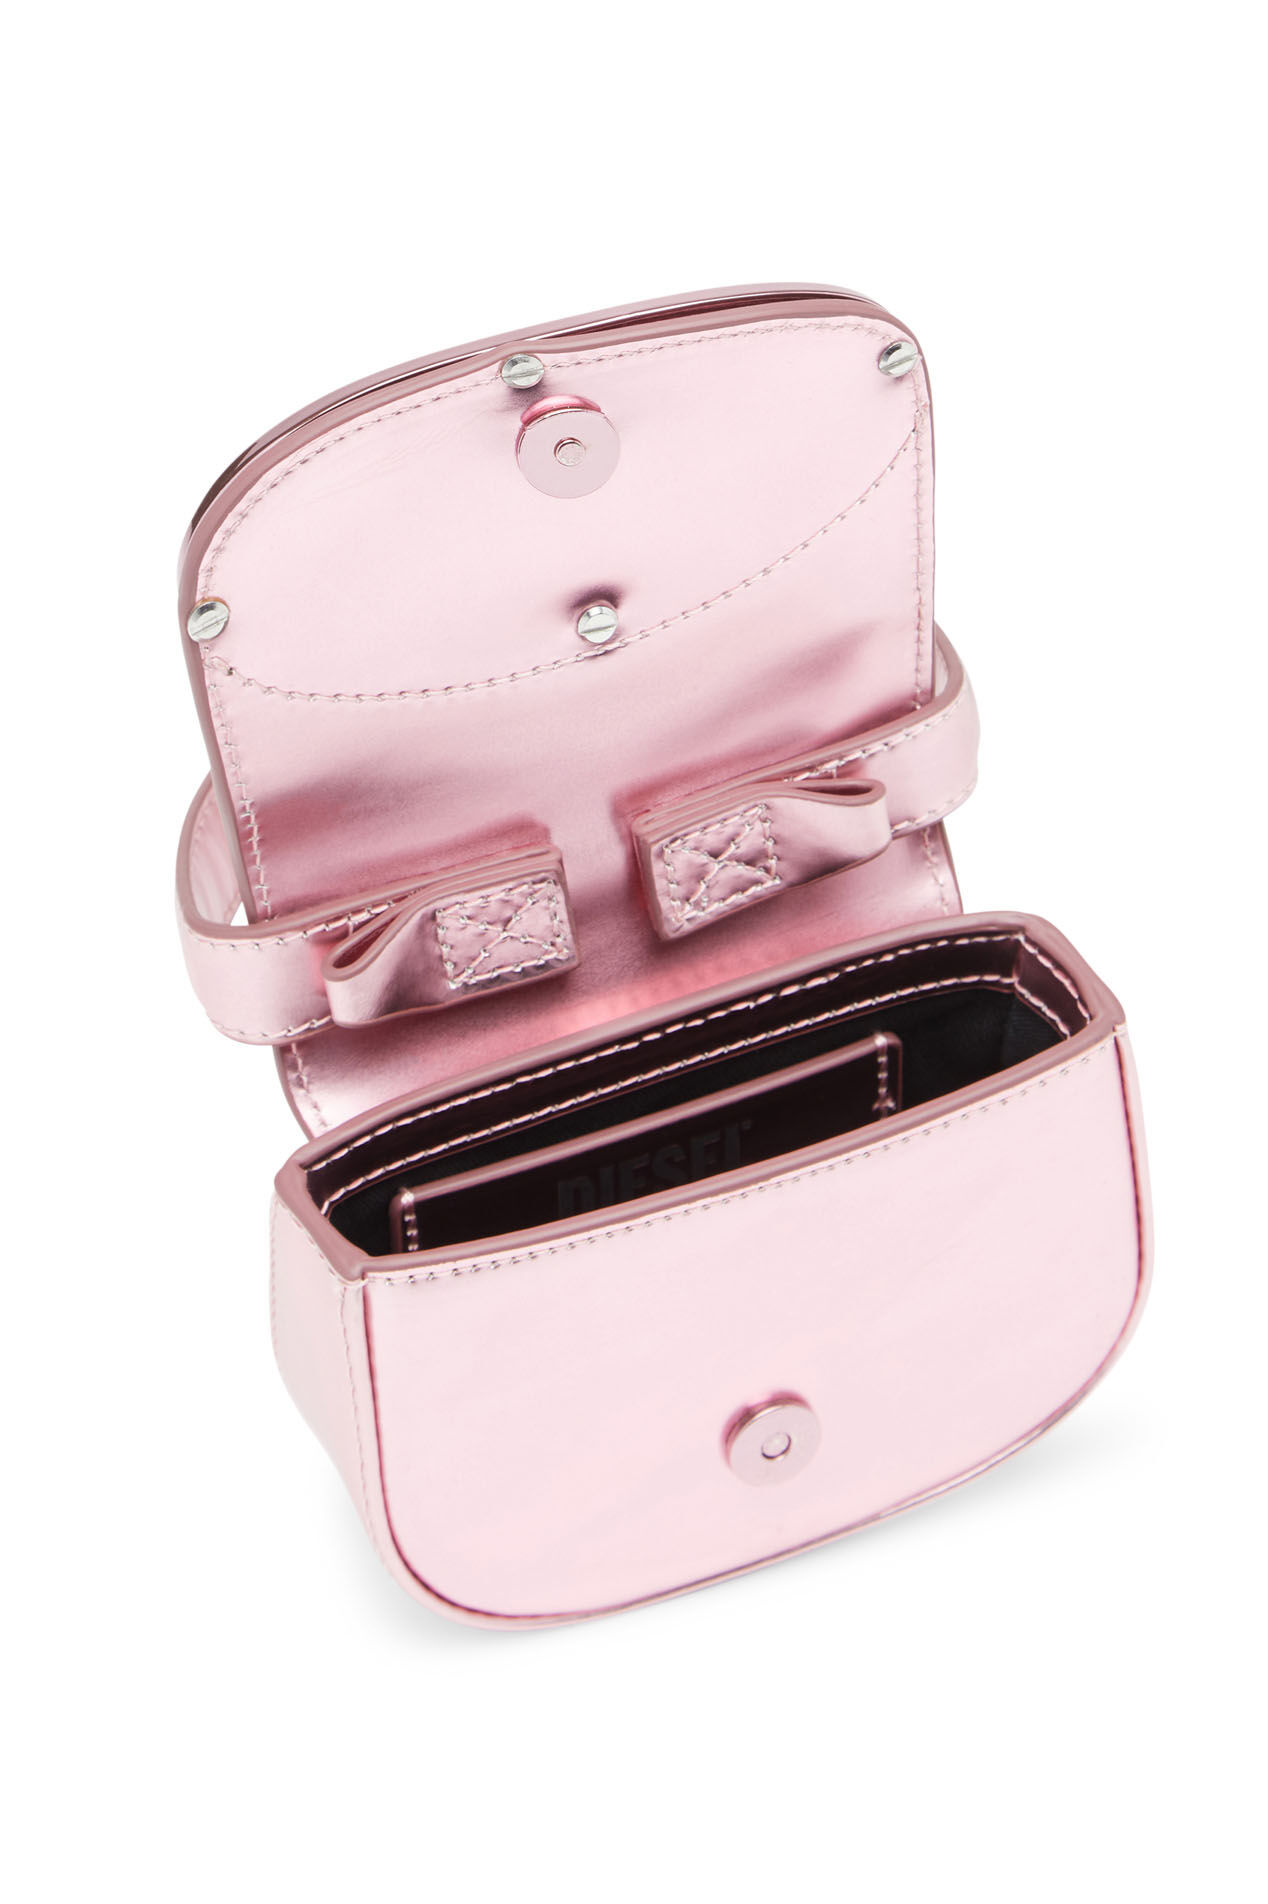 Diesel - 1DR-XS-S, Woman 1DR-XS-S-Iconic mini bag in mirrored leather in Pink - Image 5